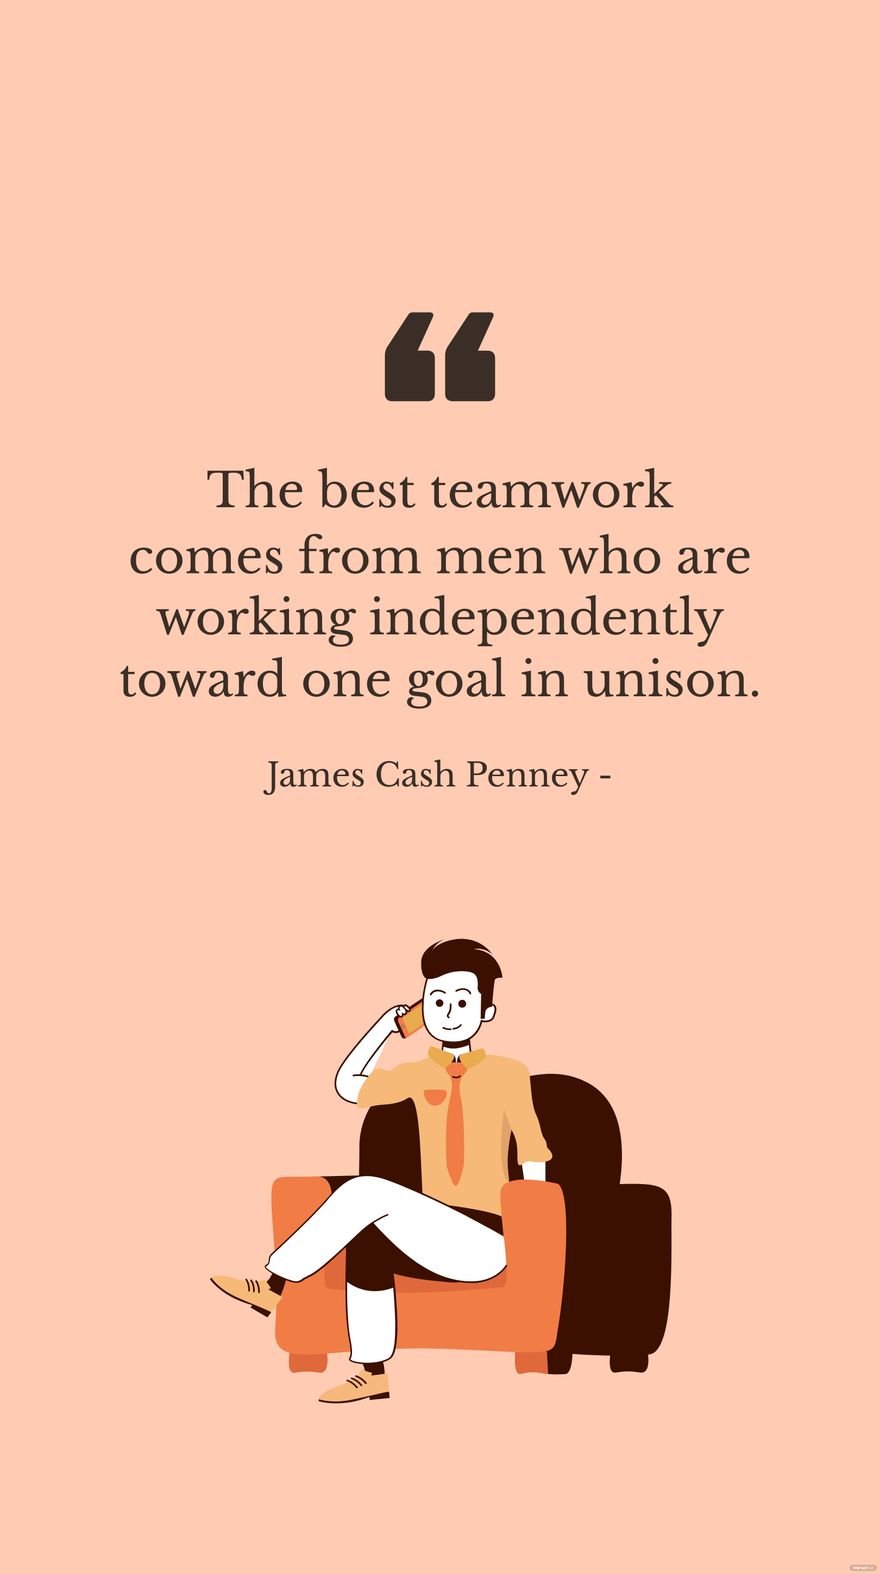 Free James Cash Penney - The best teamwork comes from men who are working independently toward one goal in unison.